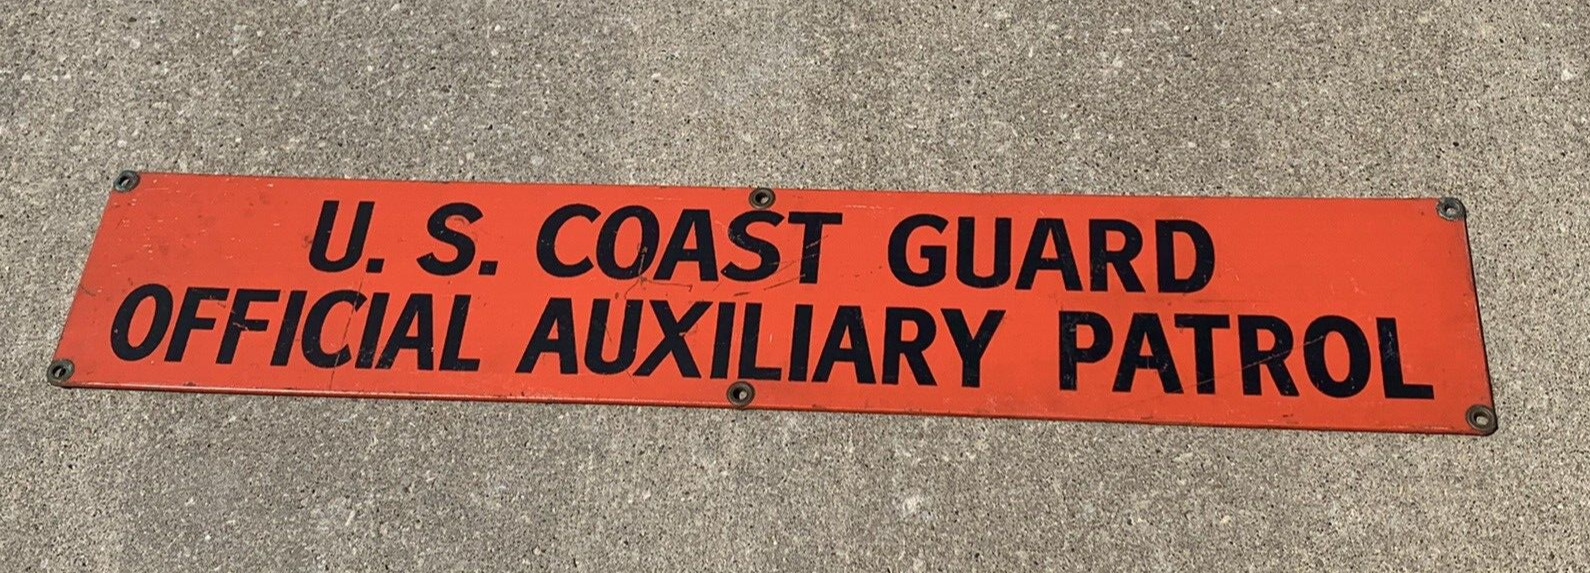 VINTAGE ORIGINAL DOUBLE SIDED US COAST GUARD OFFICIAL AUXILIARY PATROL SIGN 48\